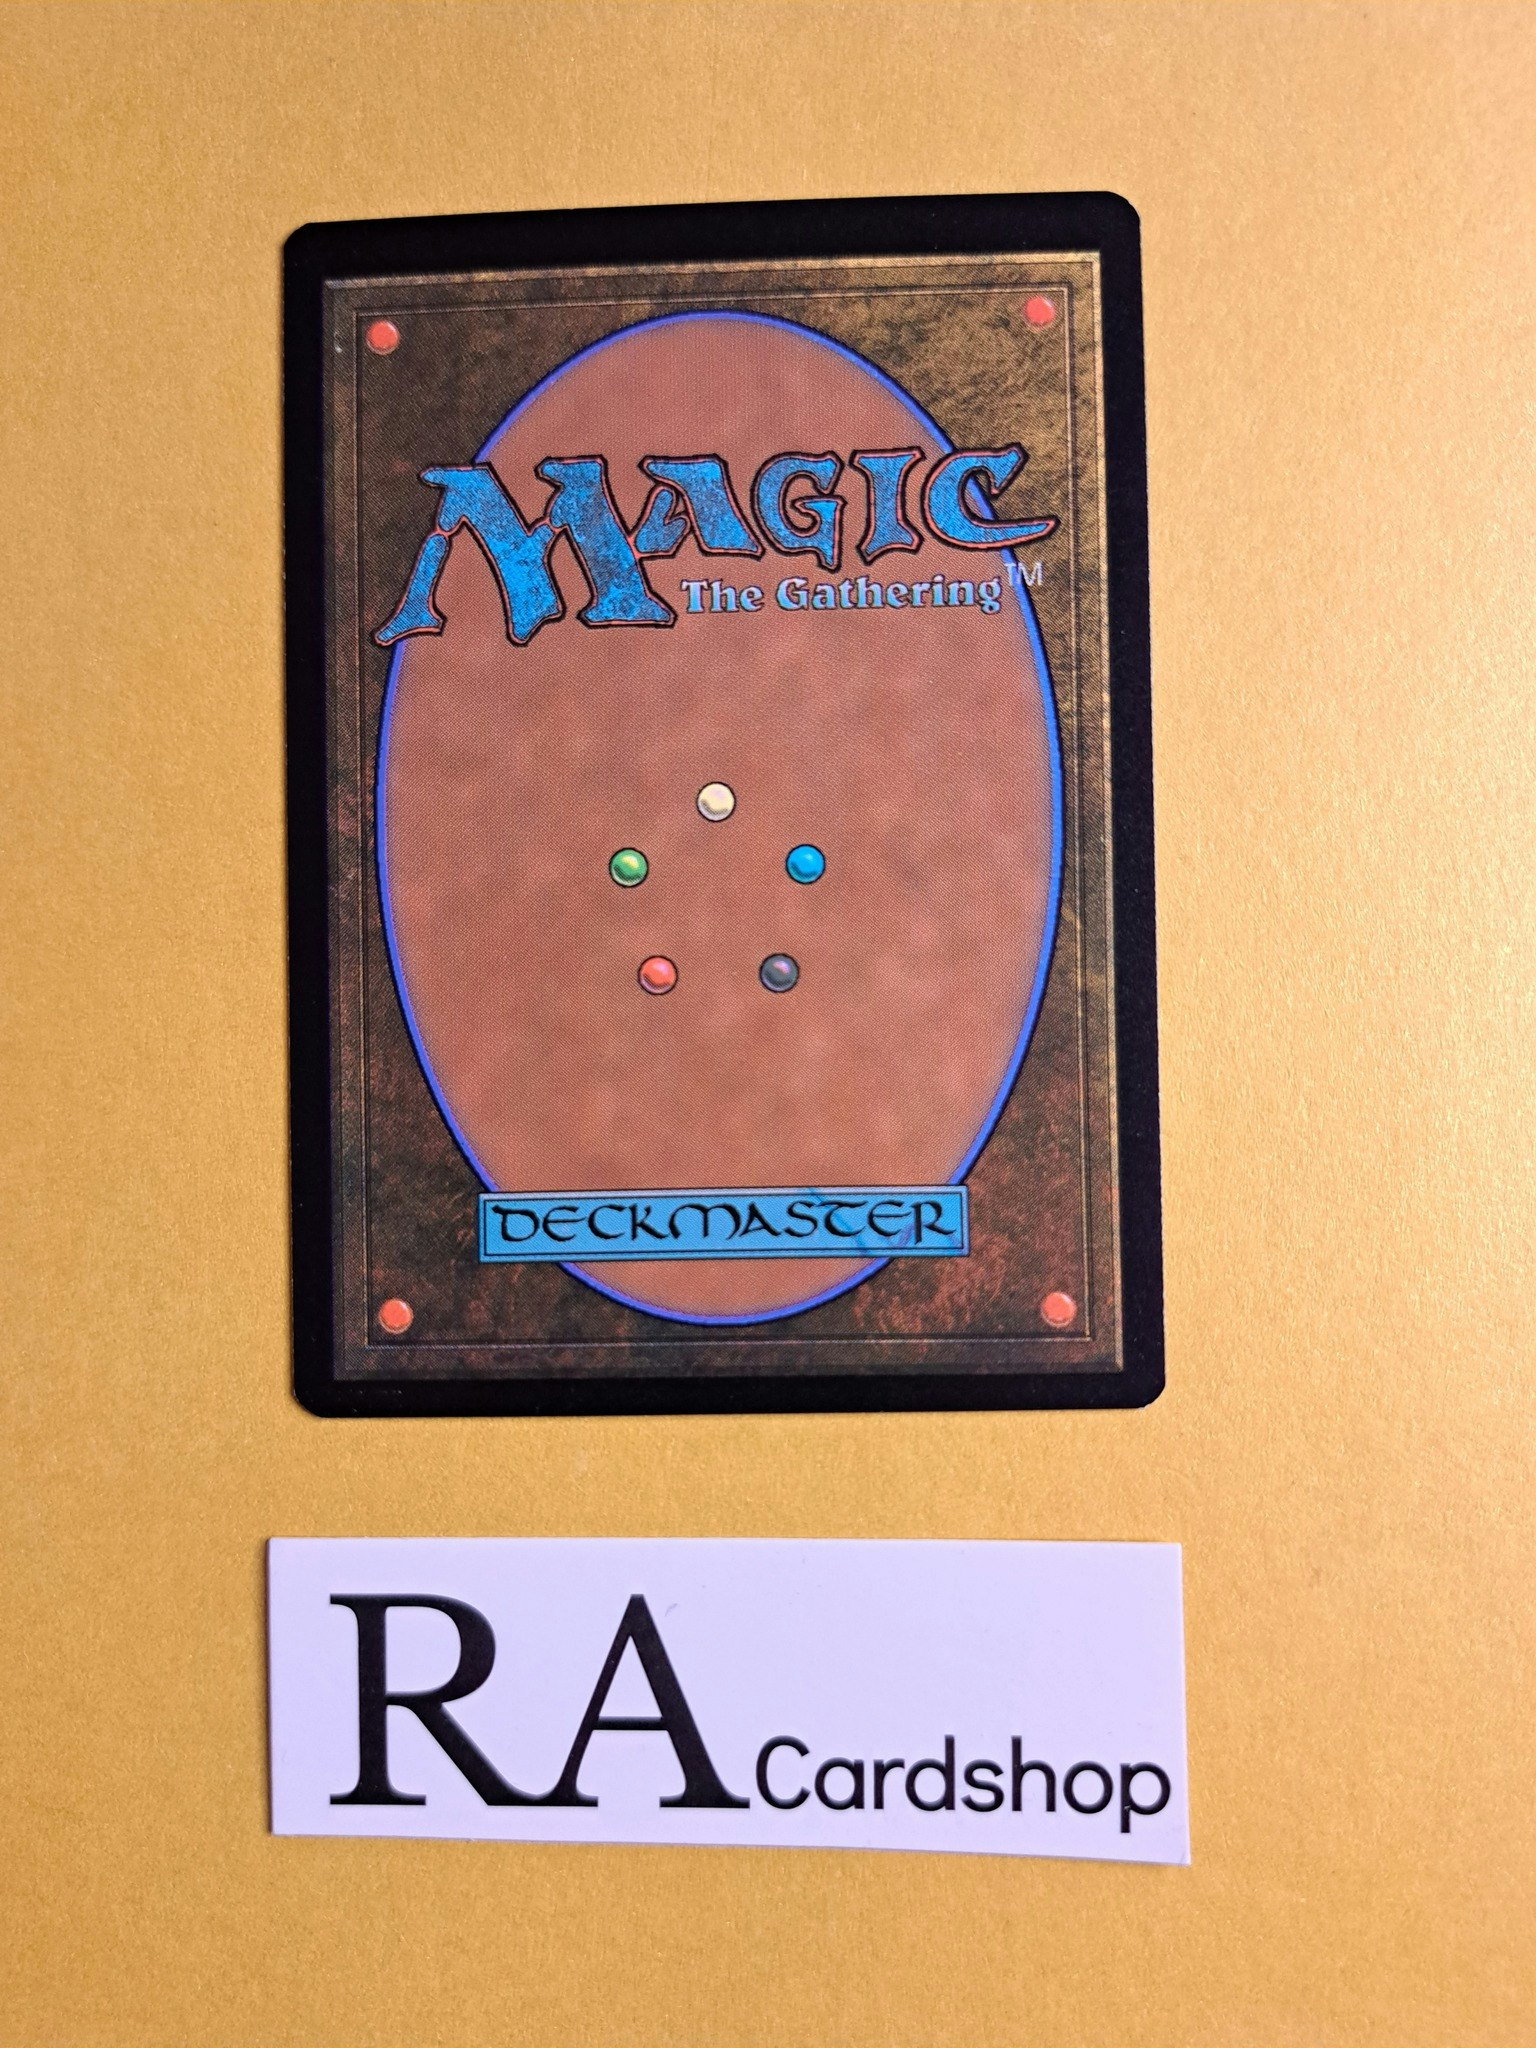 Bewitching Leechcraft Common 041 The Lord of the Rings Tales of Middle-earth Magic the Gathering